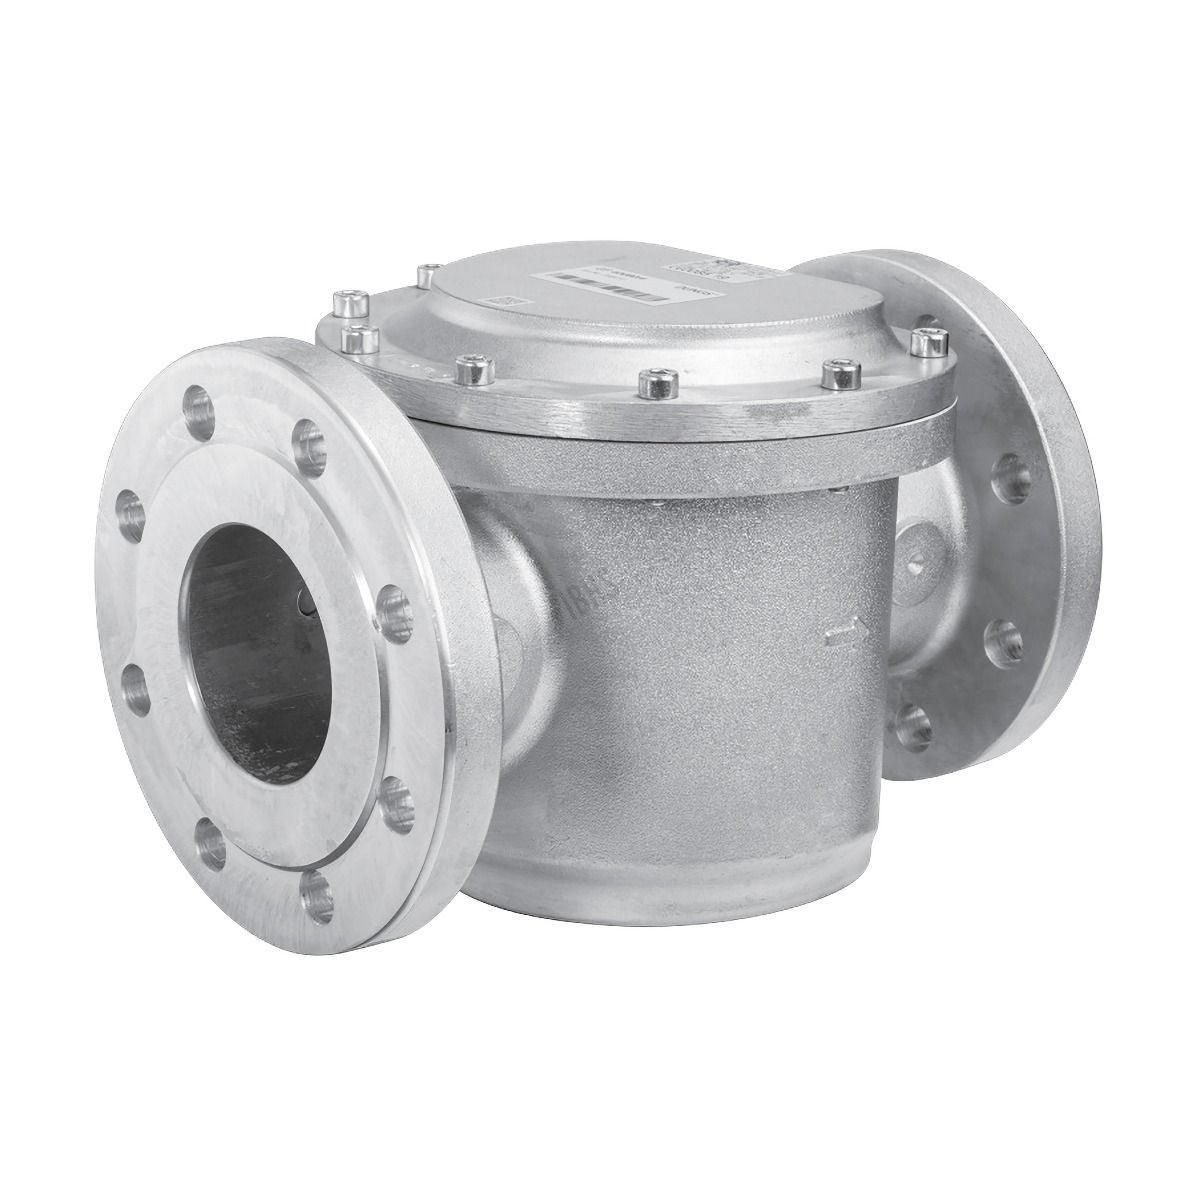 80mm Flanged PN16 Gas Filter 6 Bar Max Operating Pressure